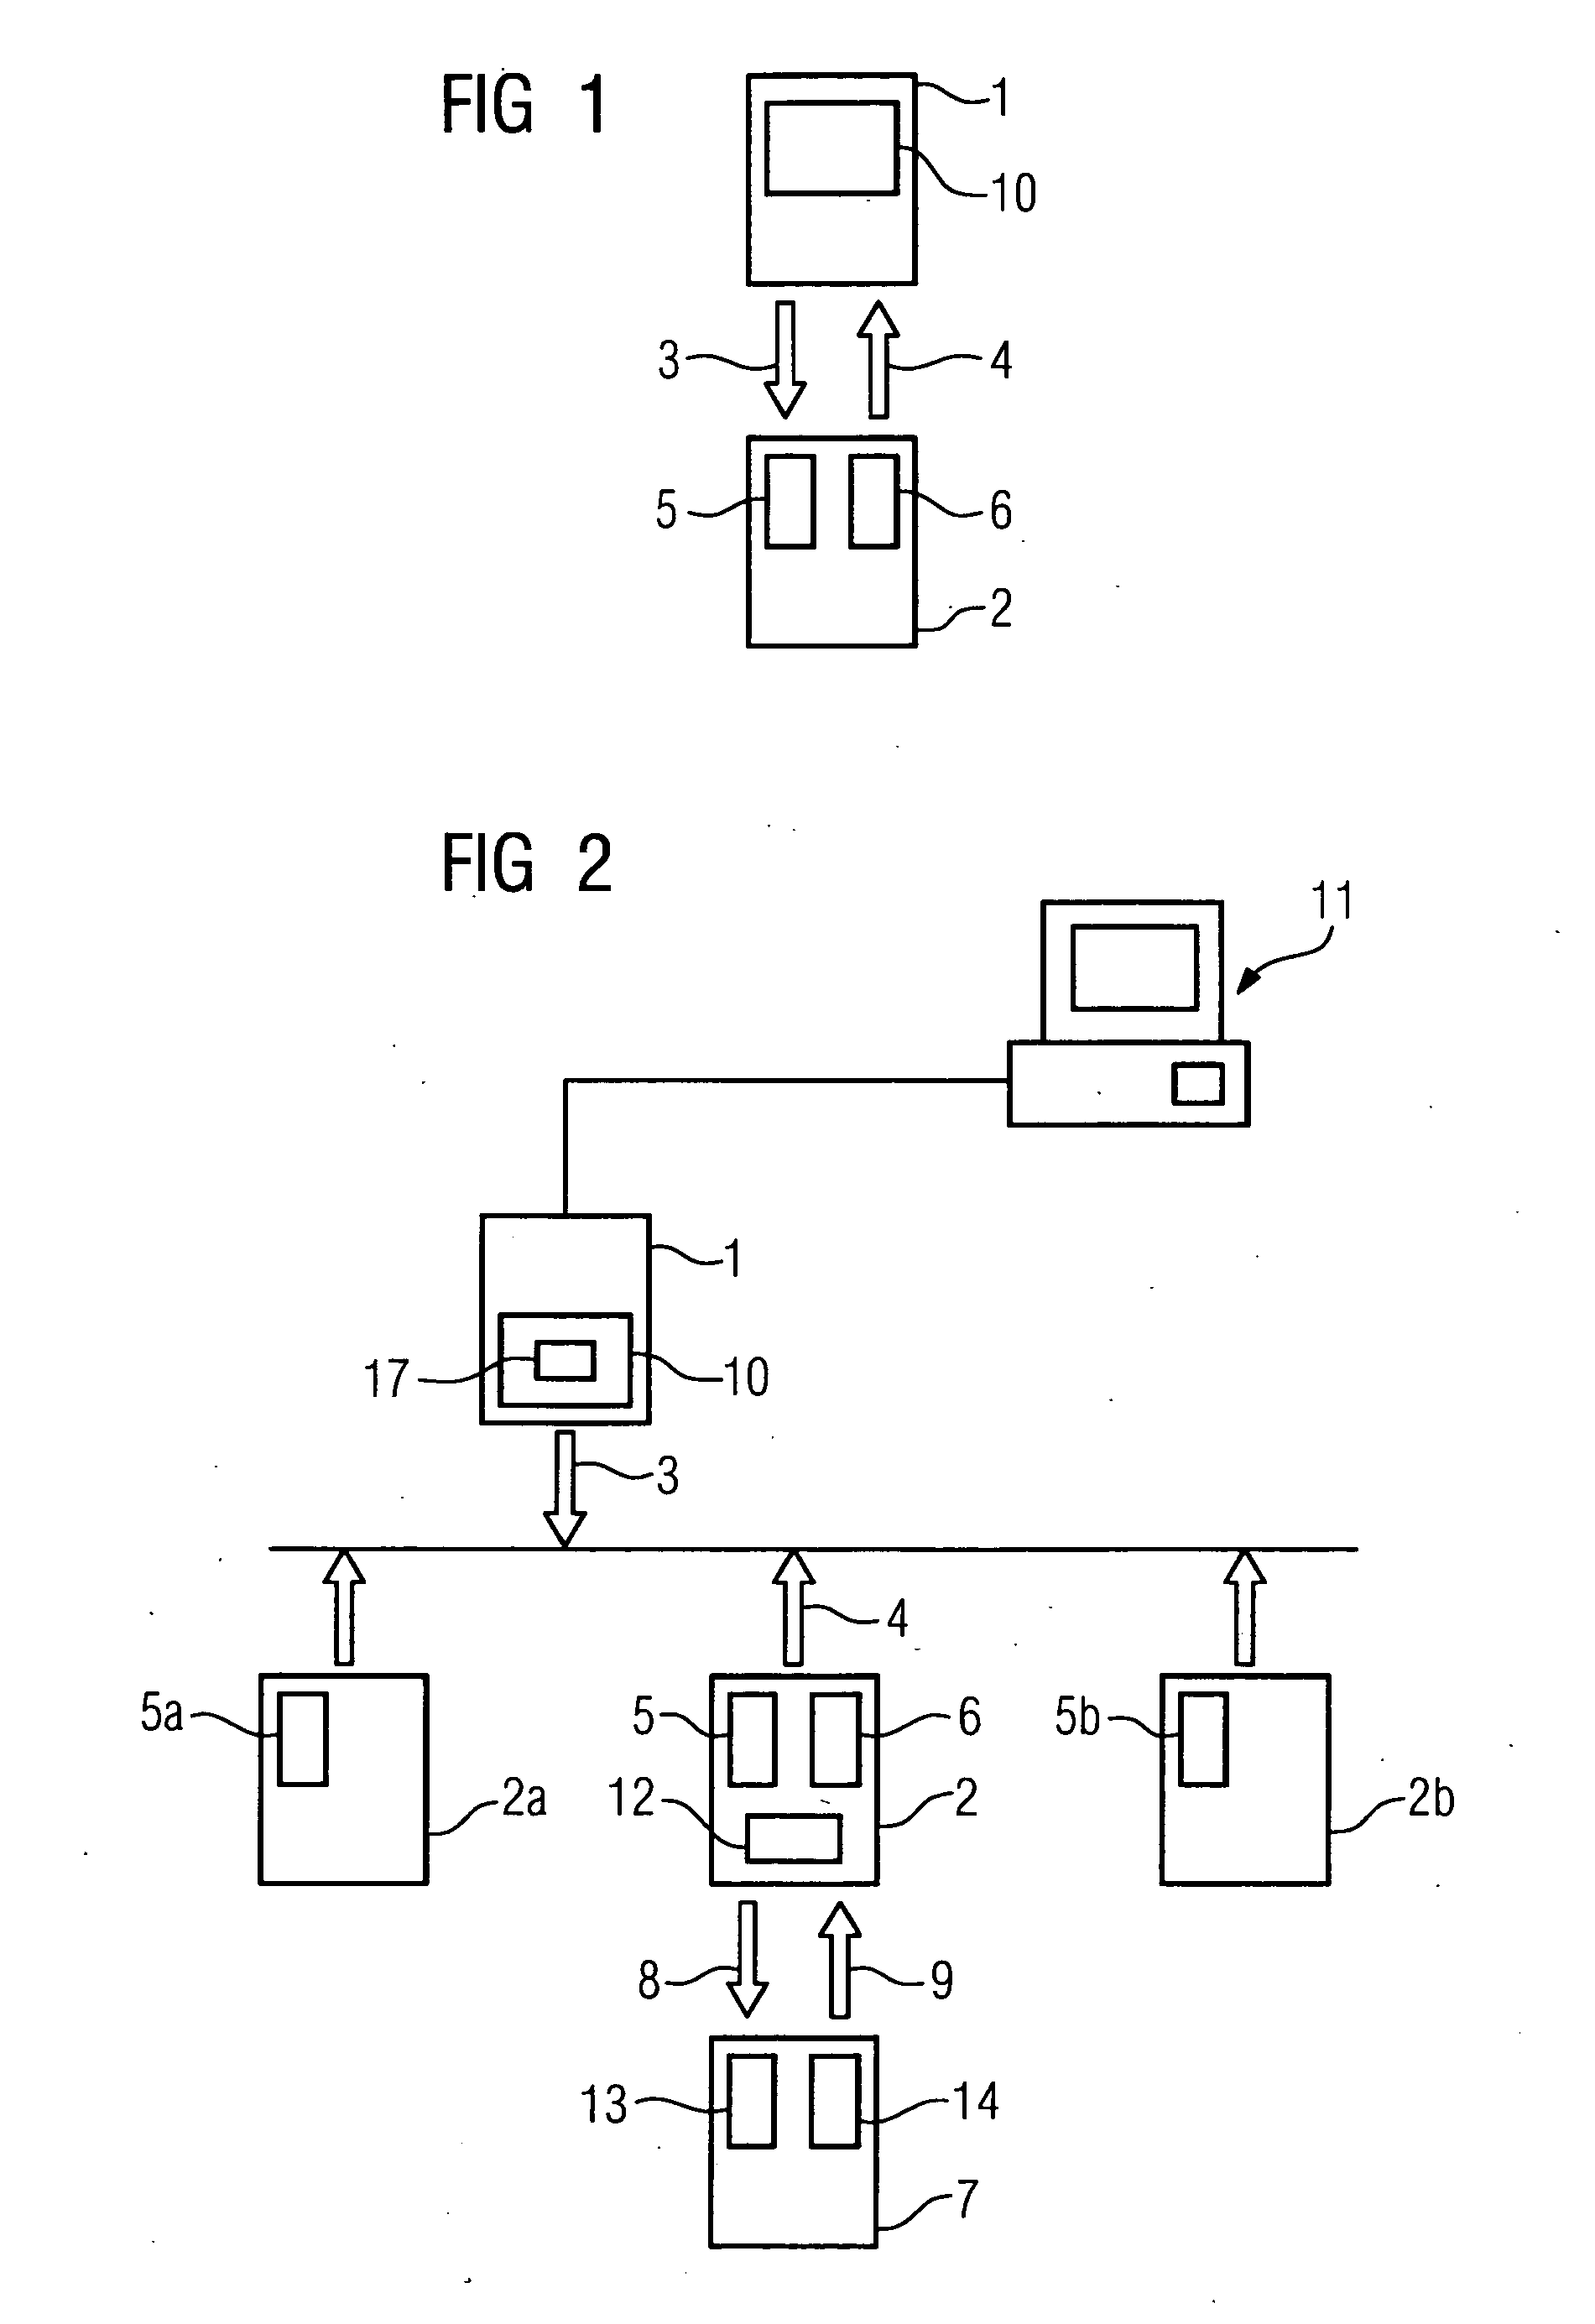 Configuration of modules in automation systems